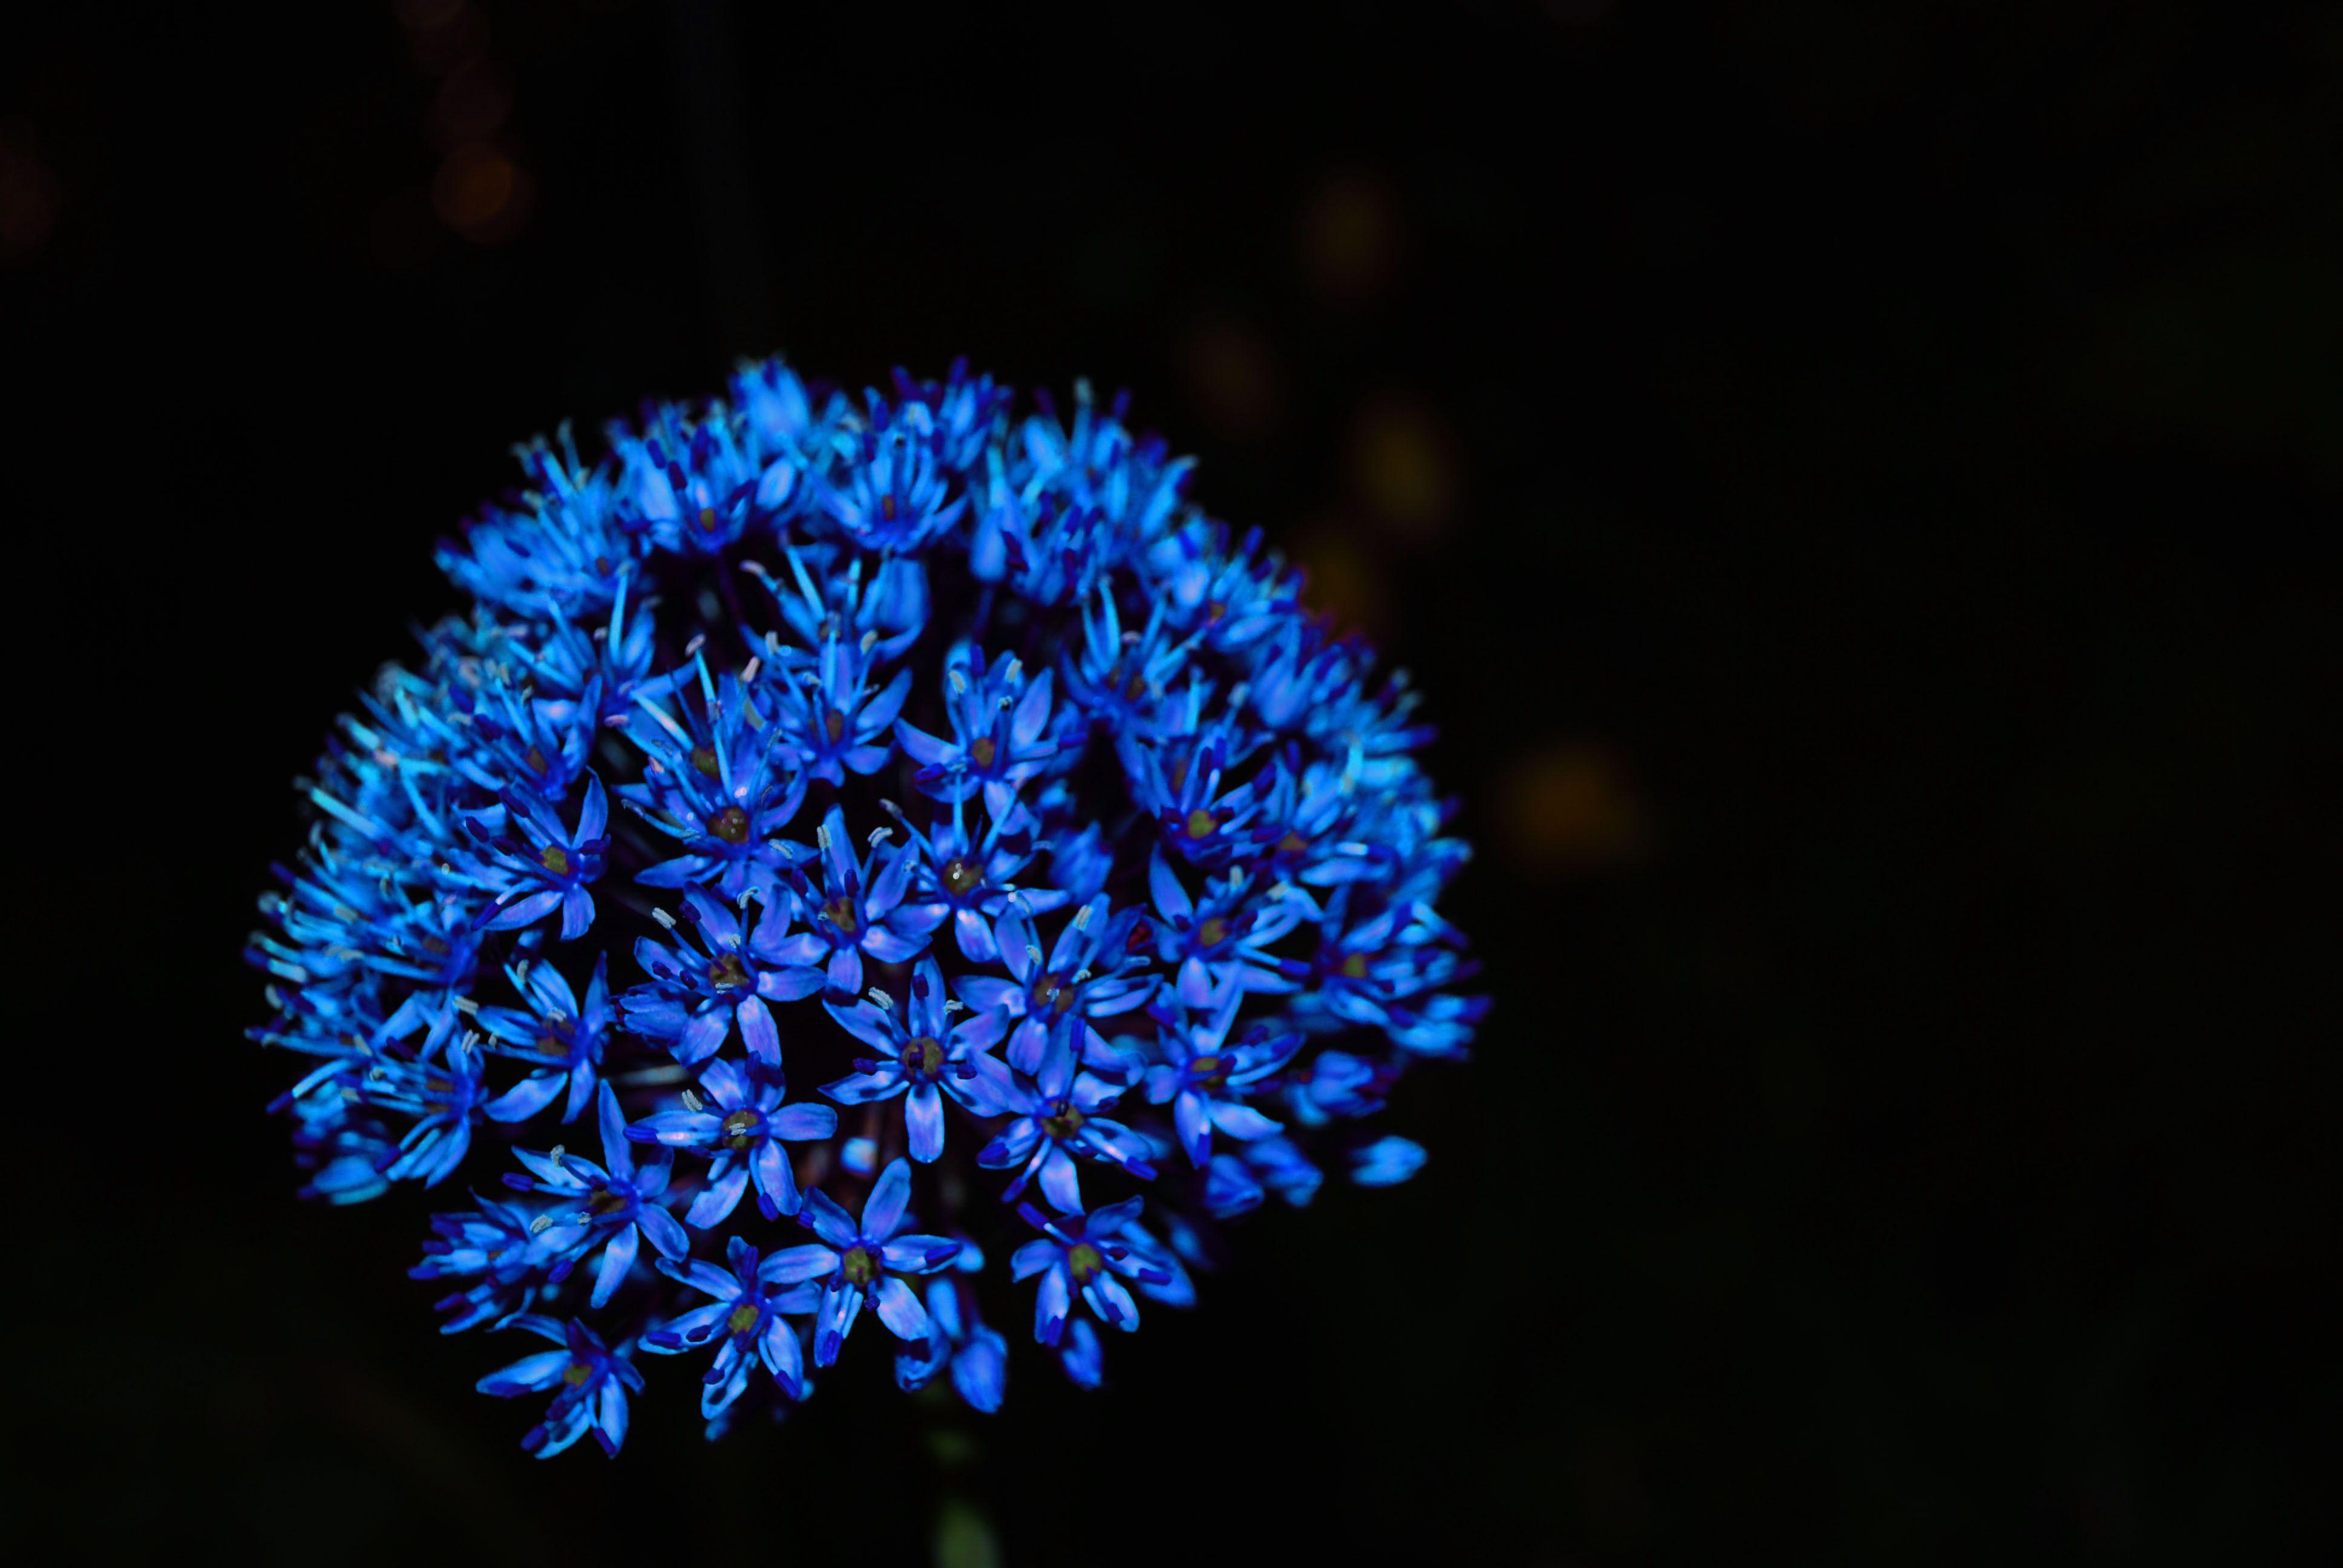 awesome blue flower wallpaper tumblr. Senior project